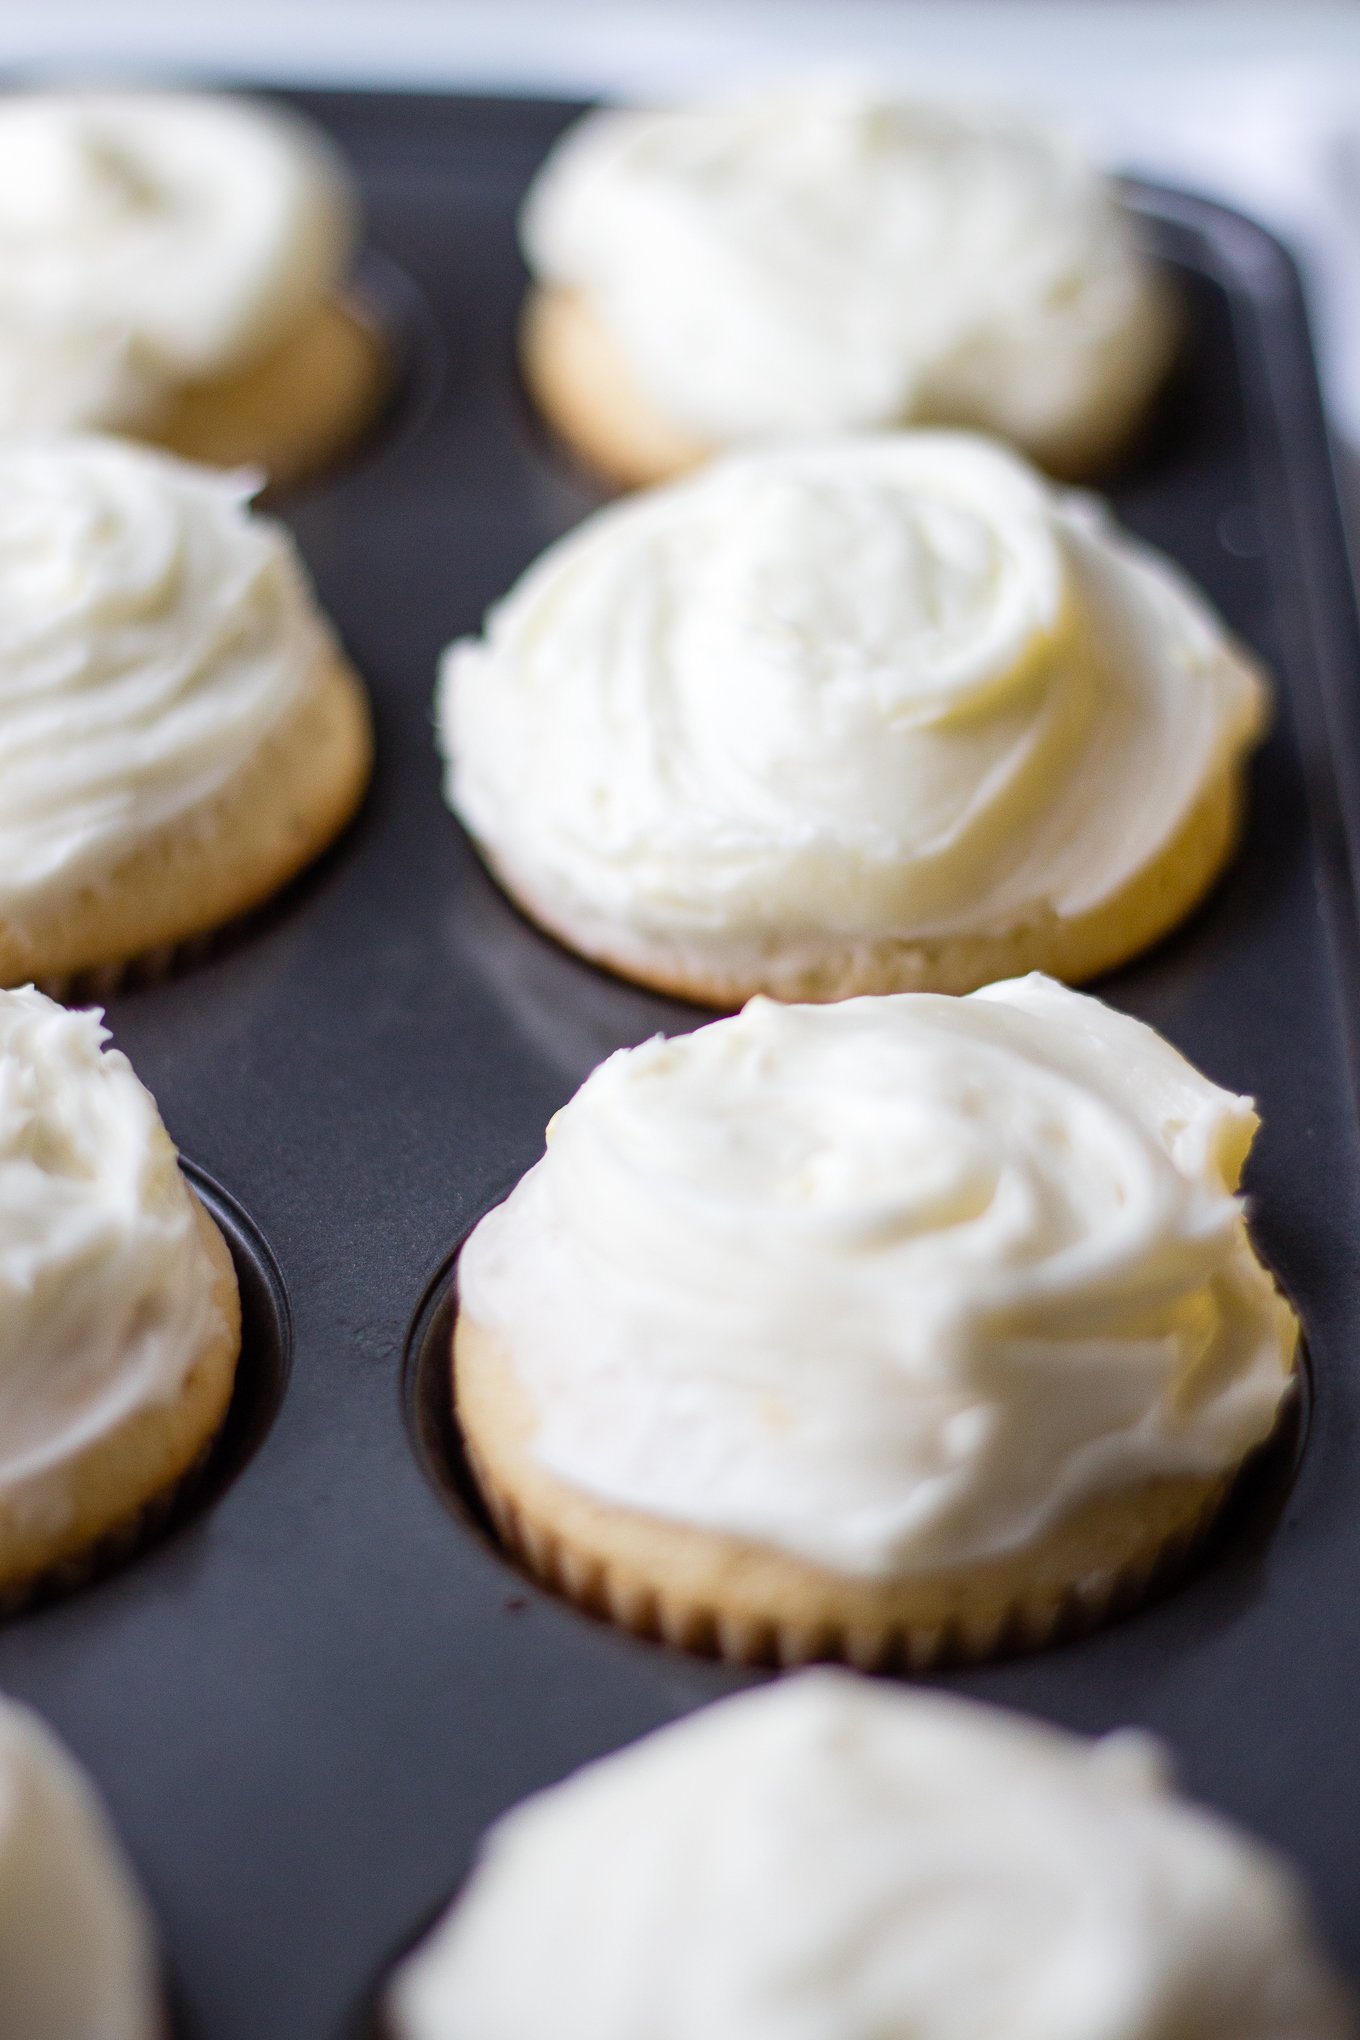 Shock Top Belgian White Cupcakes for National Beer Day